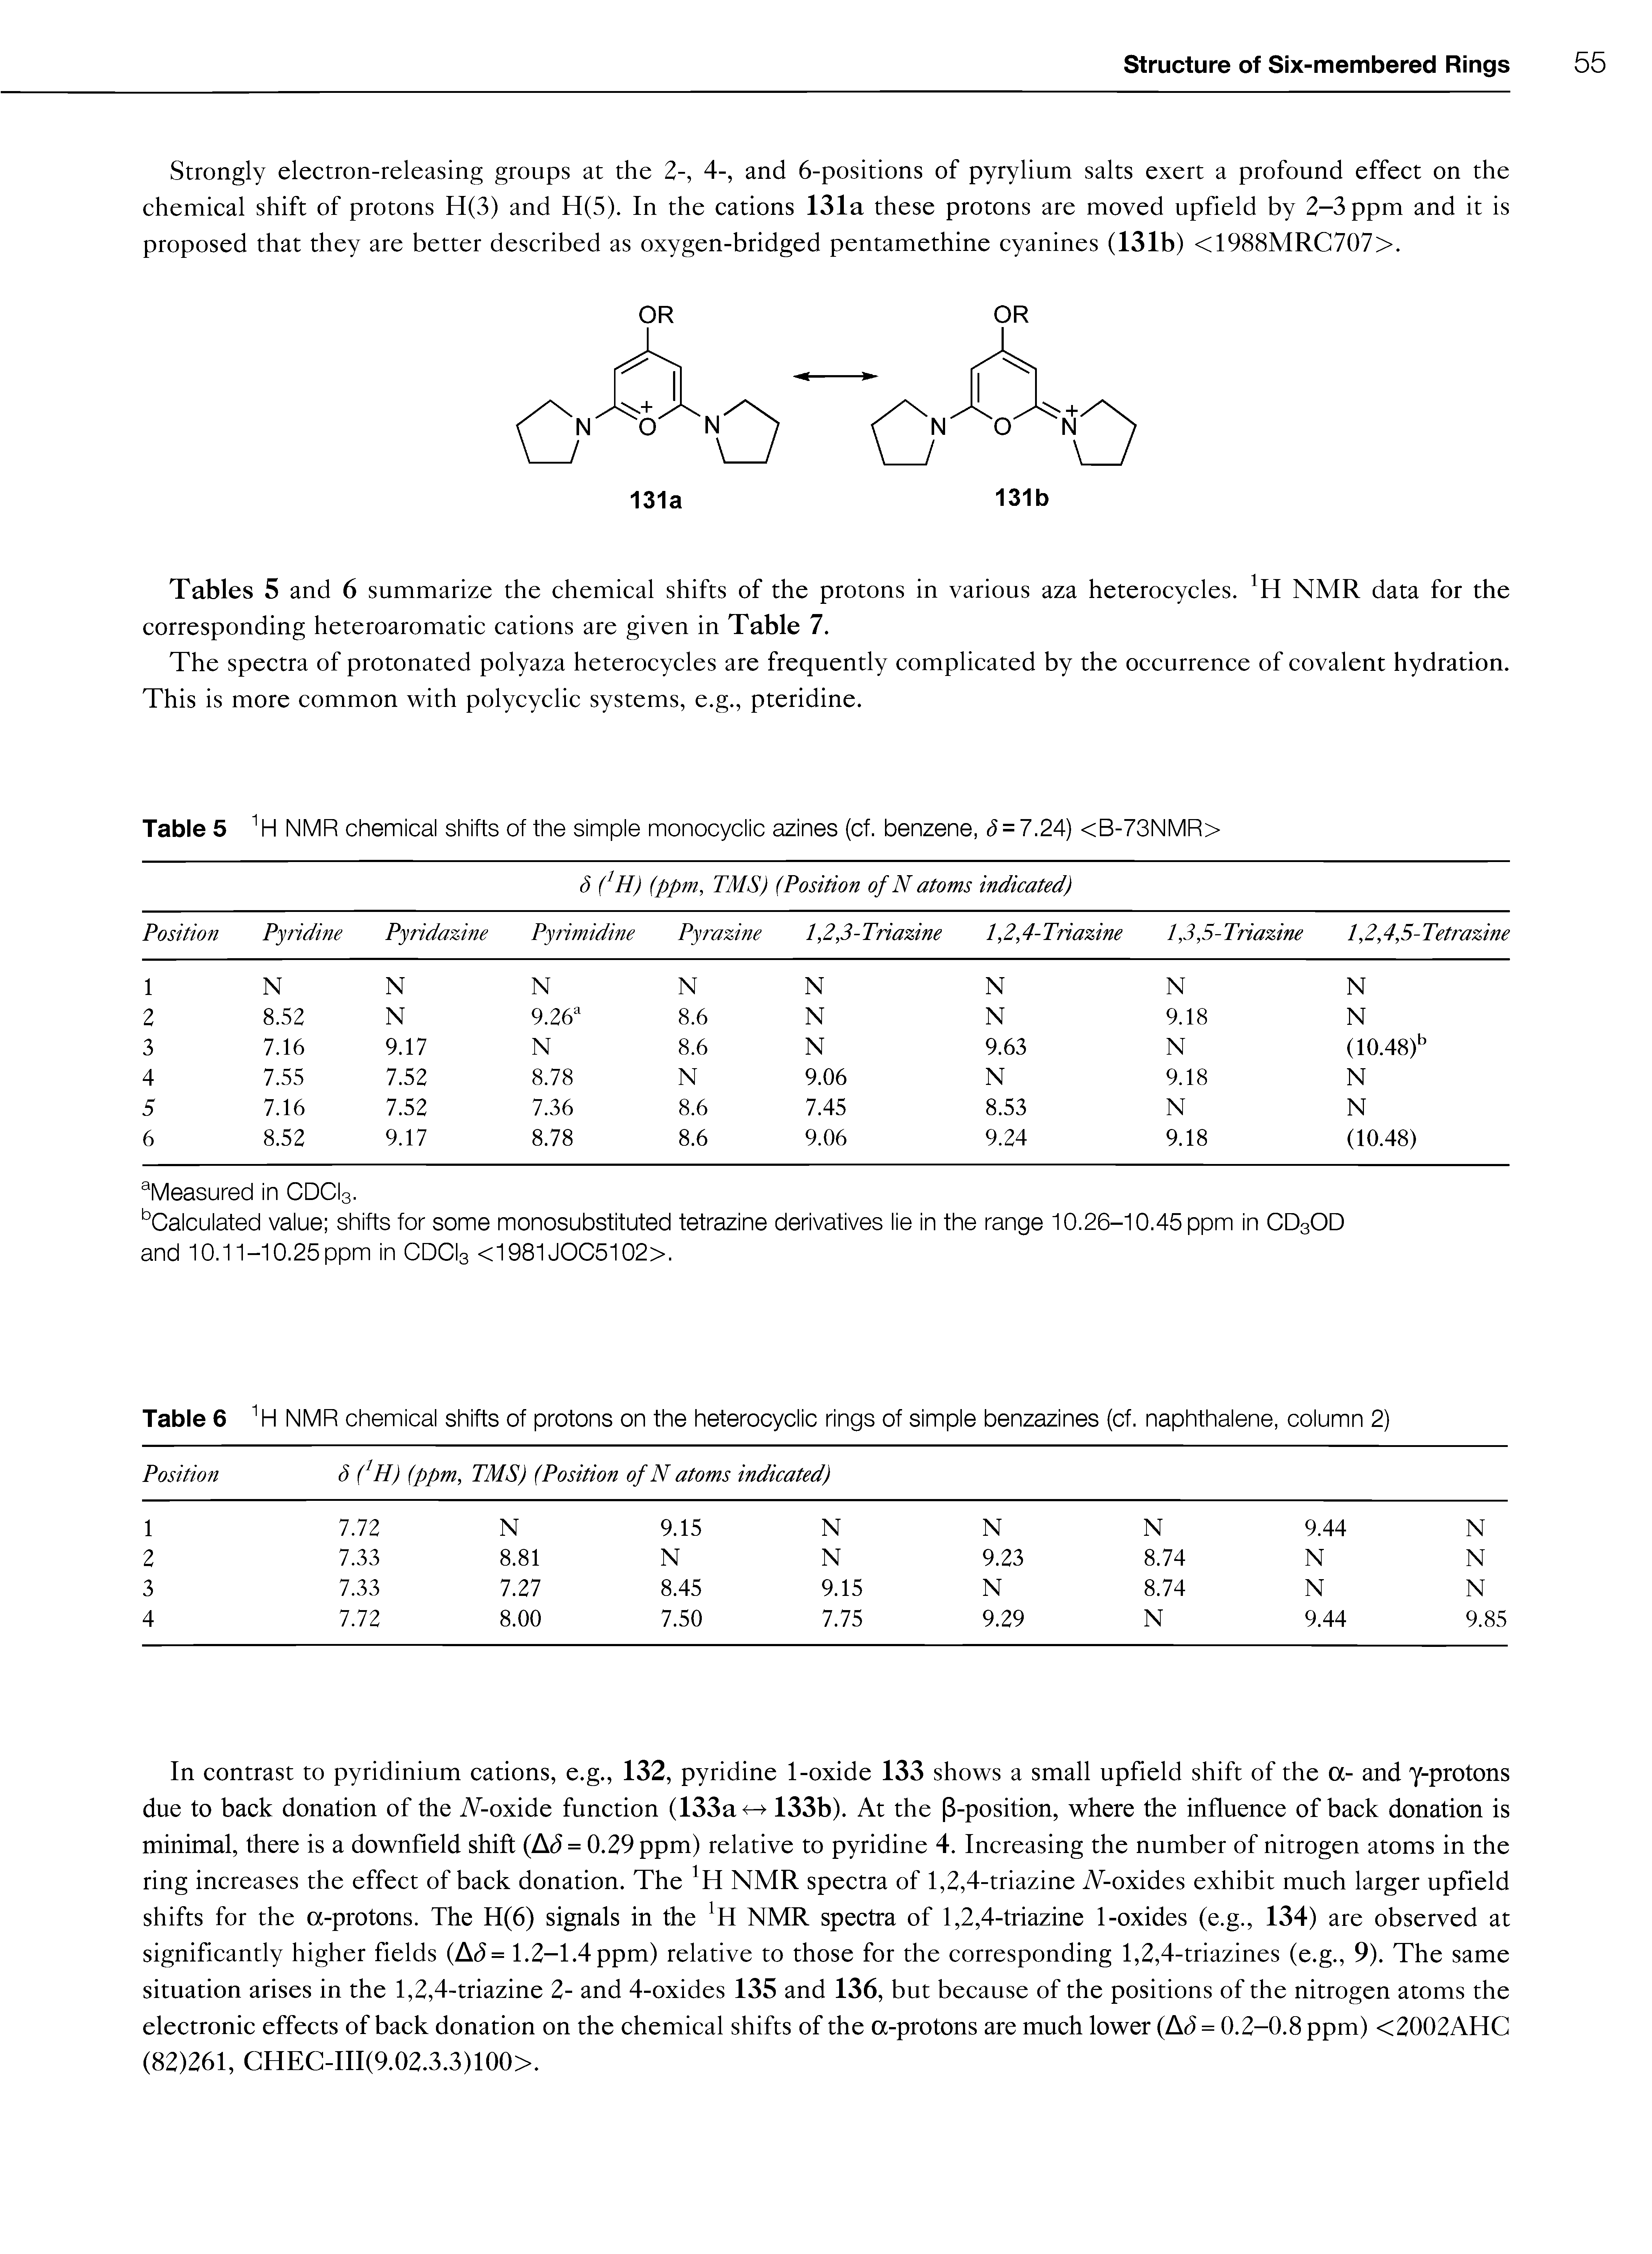 Table 6 1H NMR chemical shifts of protons on the heterocyclic rings of simple benzazines (cf. naphthalene, column 2)...